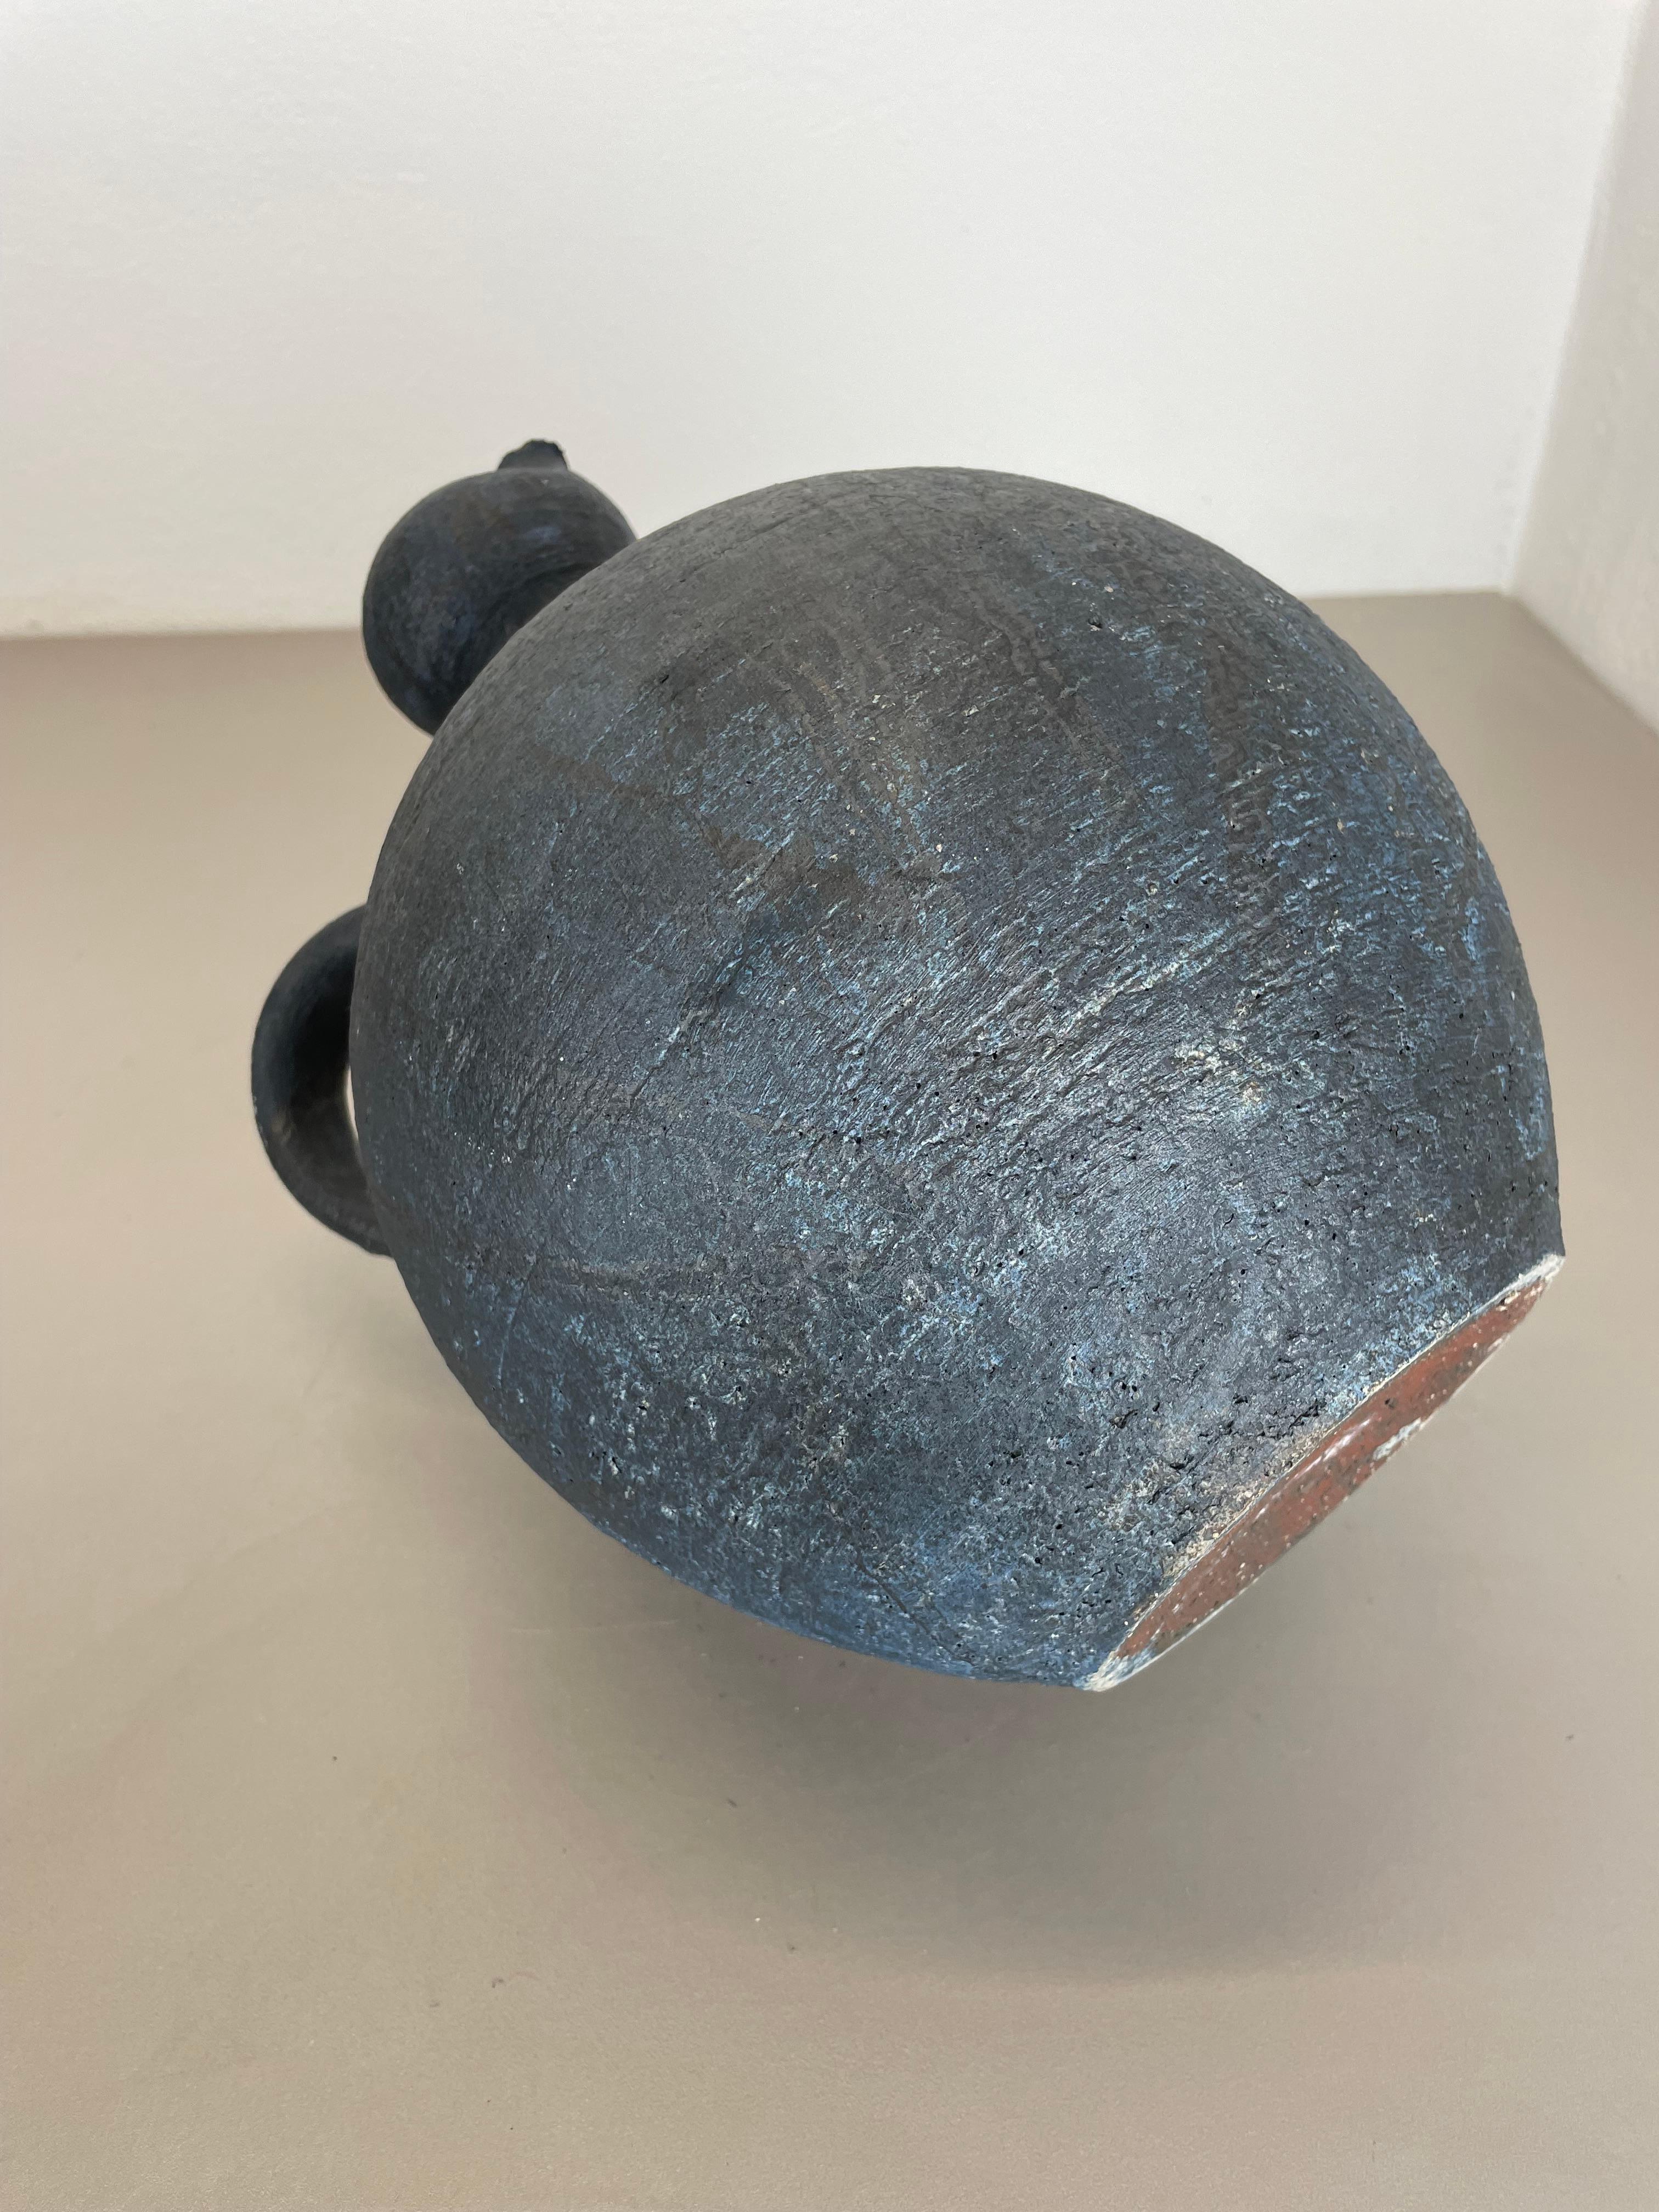 Abstract 31cm Ceramic Studio Pottery Object, Gerhard Liebenthron, Germany, 1981 For Sale 10